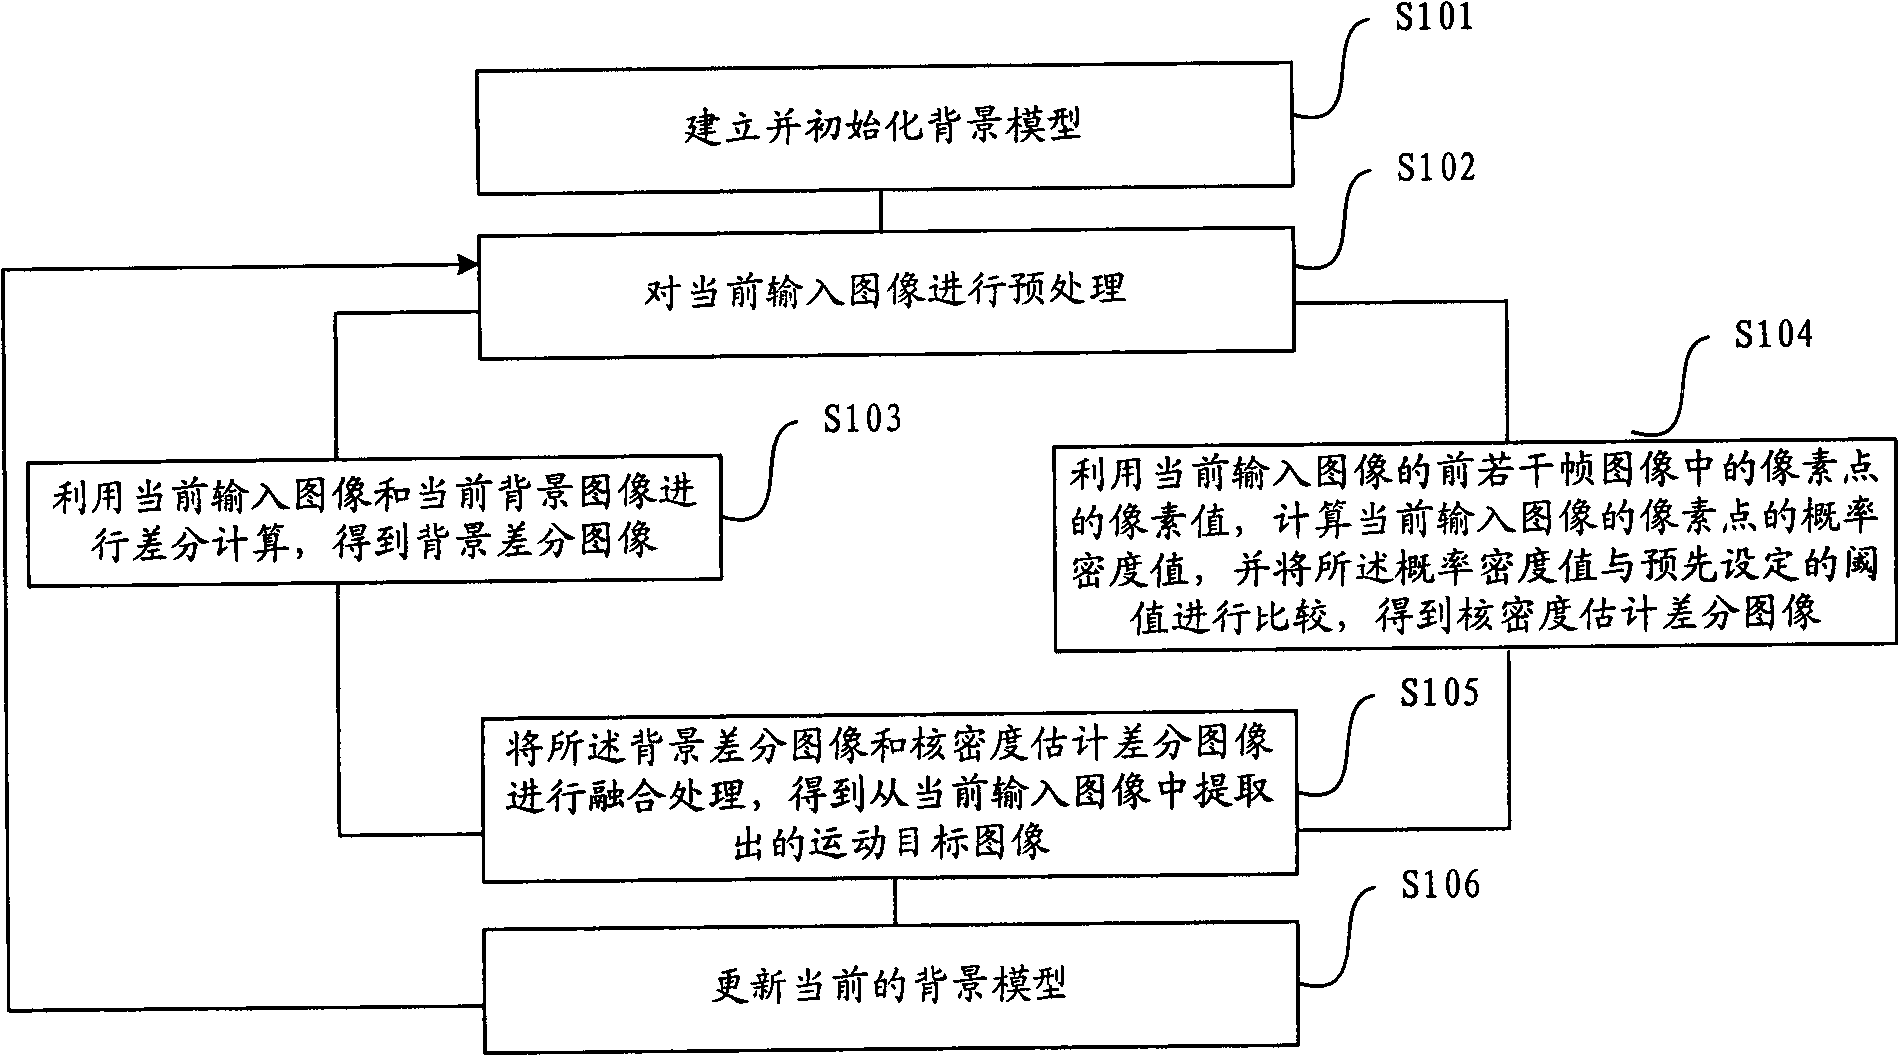 Moving target detecting and tracking method and system